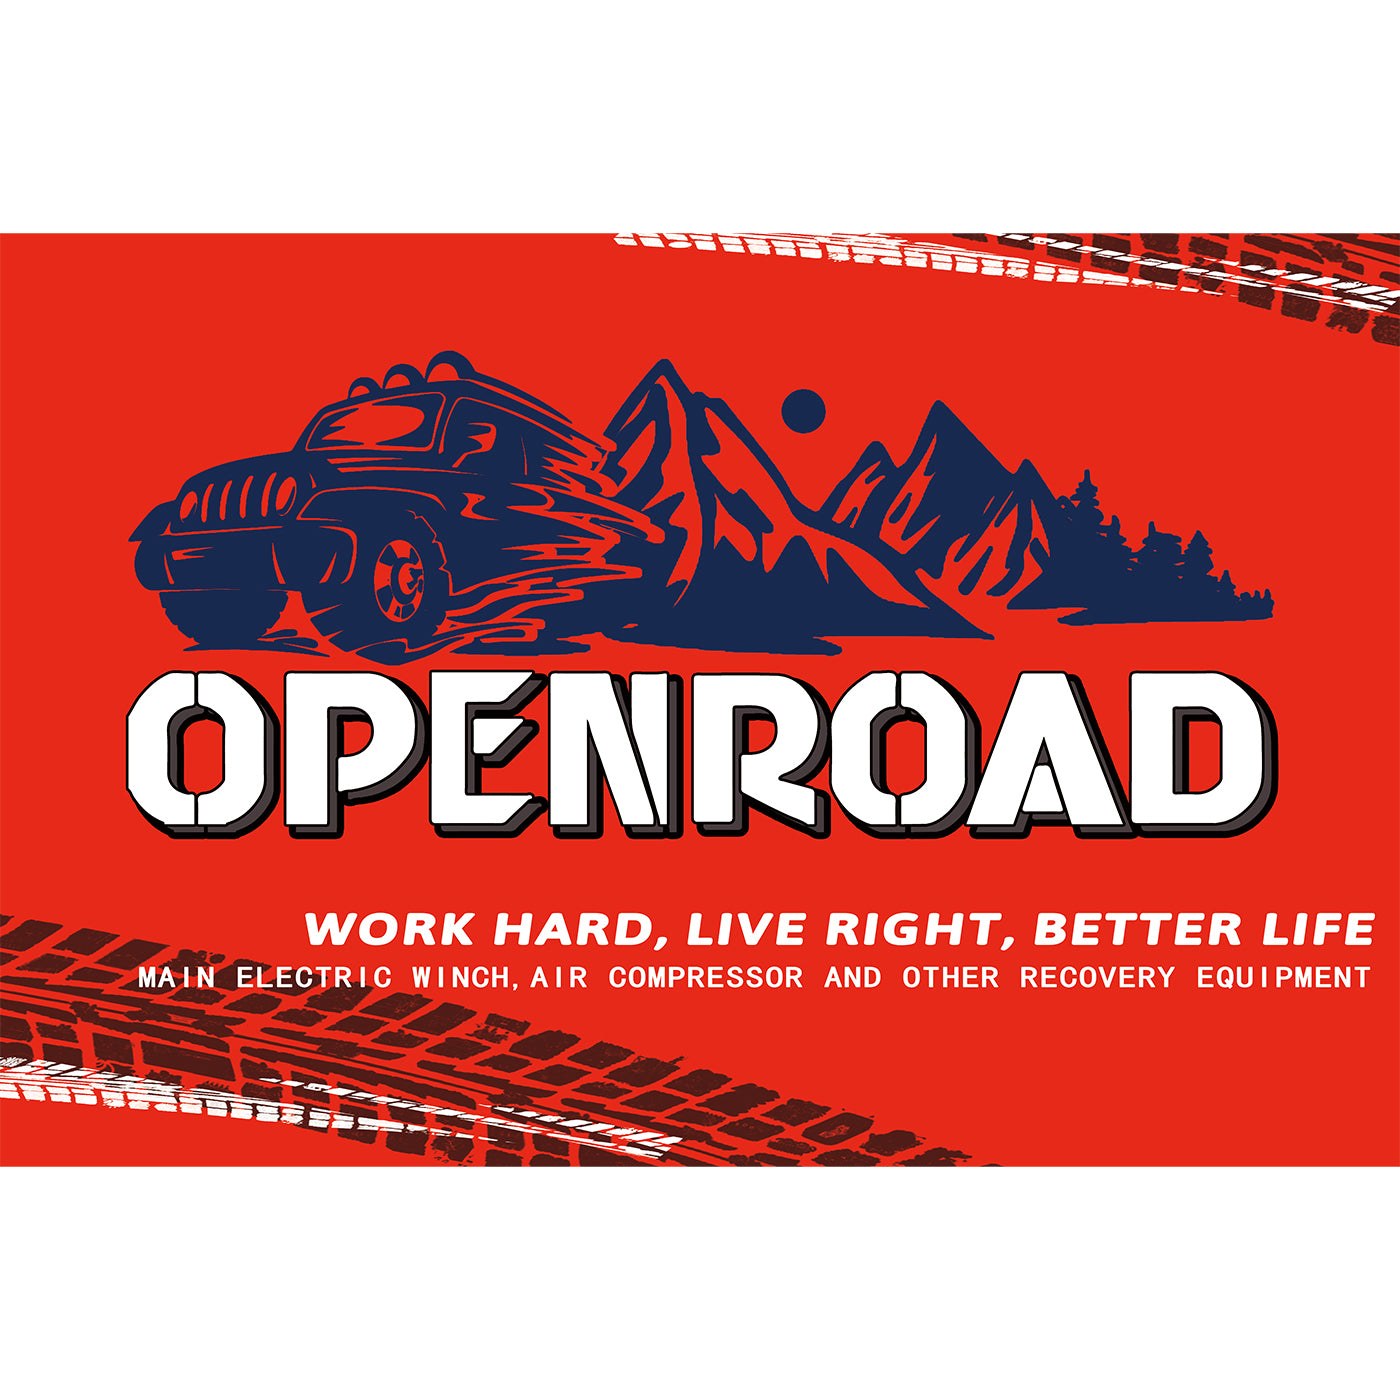 OPENROAD Personalized Banners 3' × 6'  openroad4wd.com   